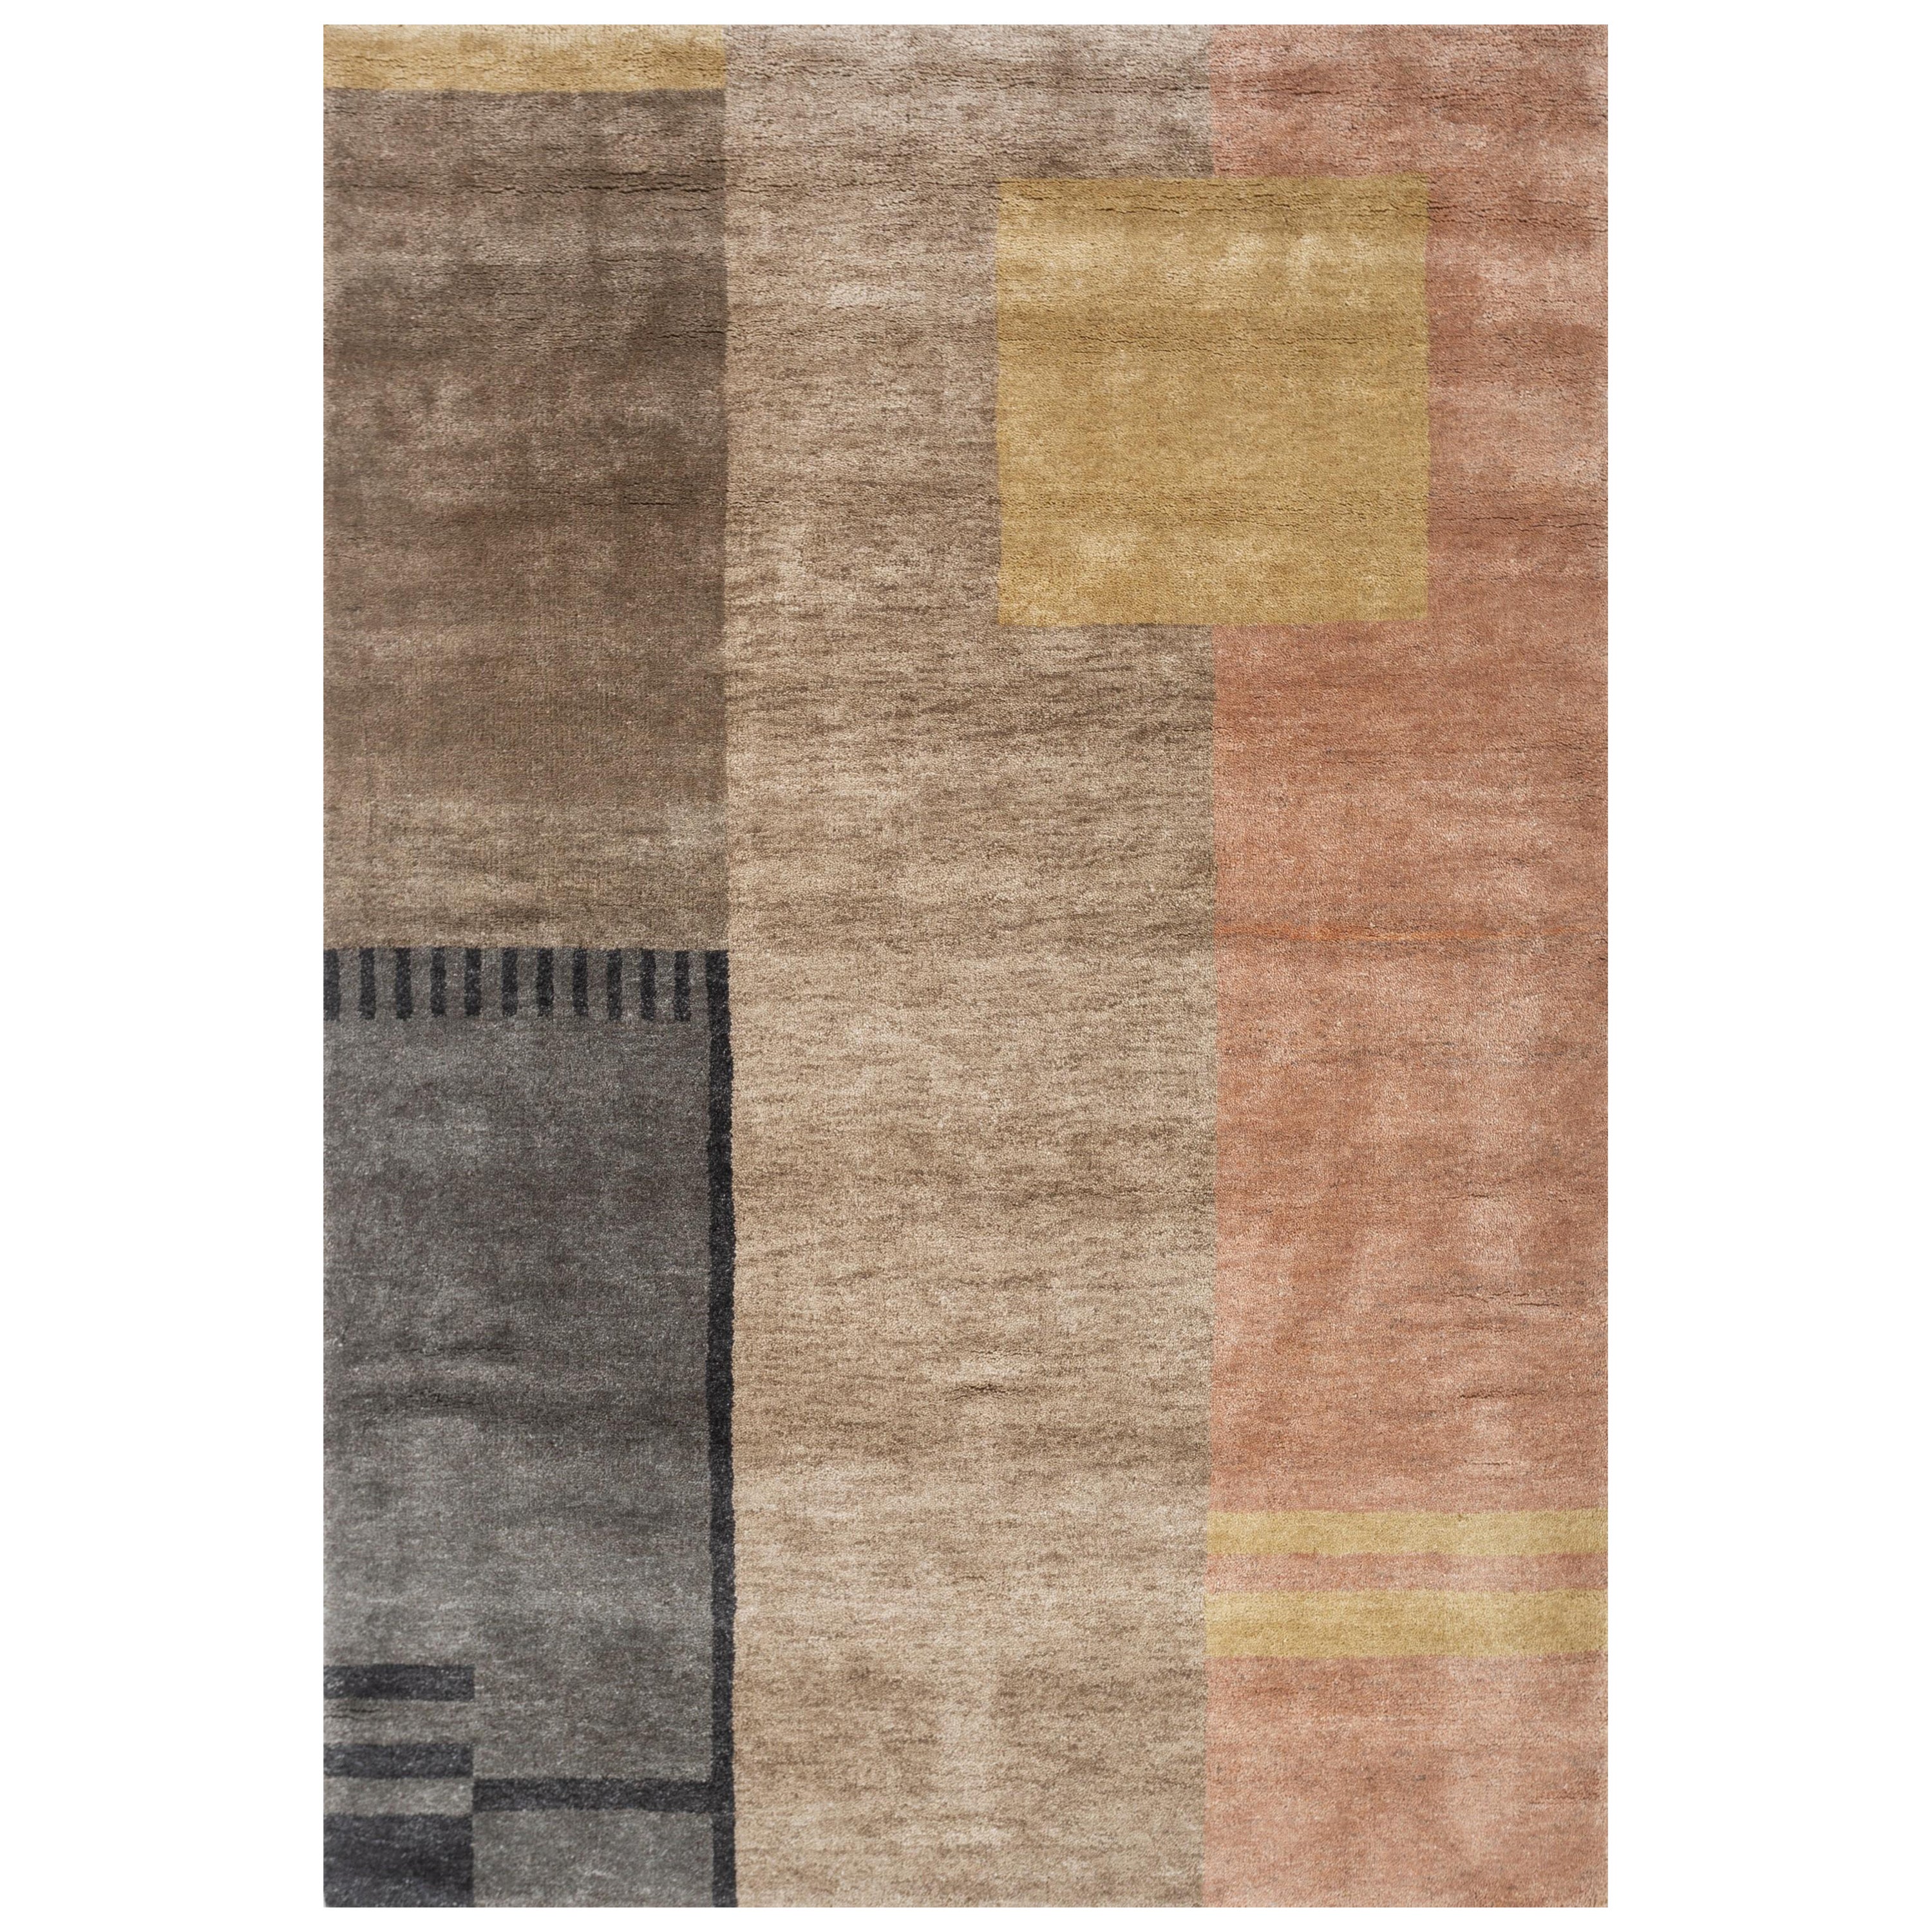 Urbane Loomscape Classic Beige & Apricot 180X270 cm Handknotted Rug